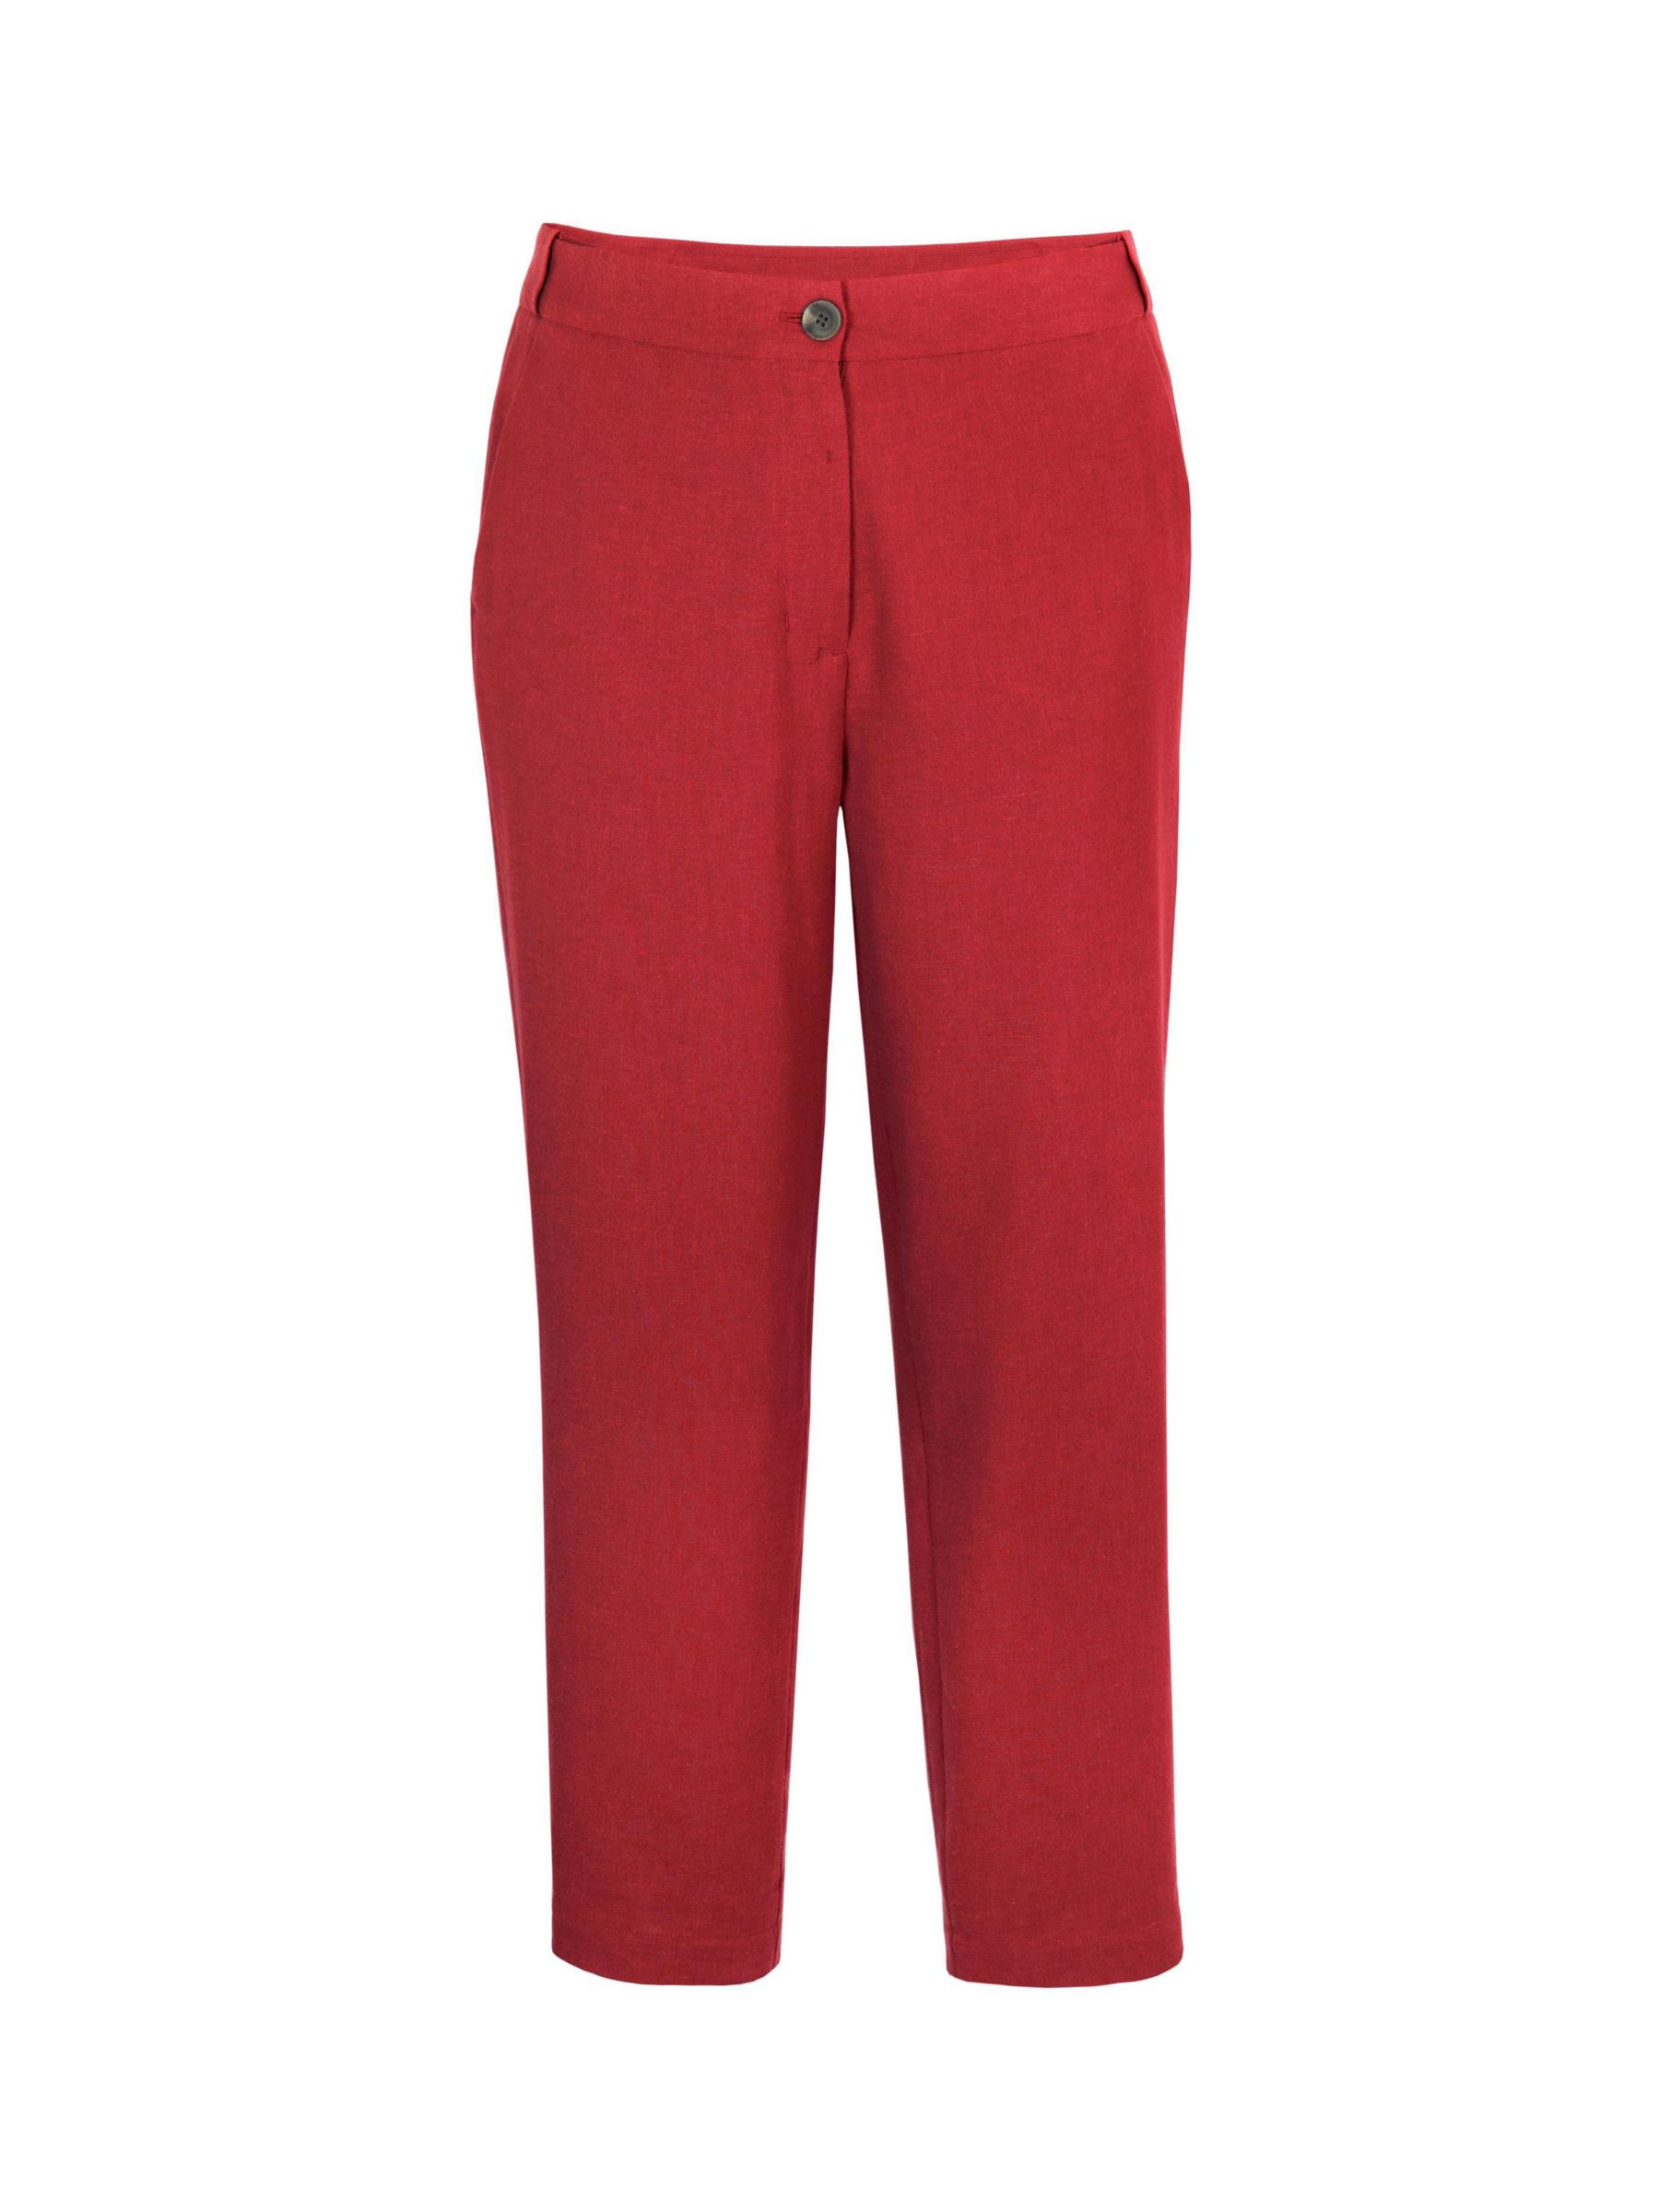 Rohan Brisa Linen Blend Trousers, Coast Red, 8S